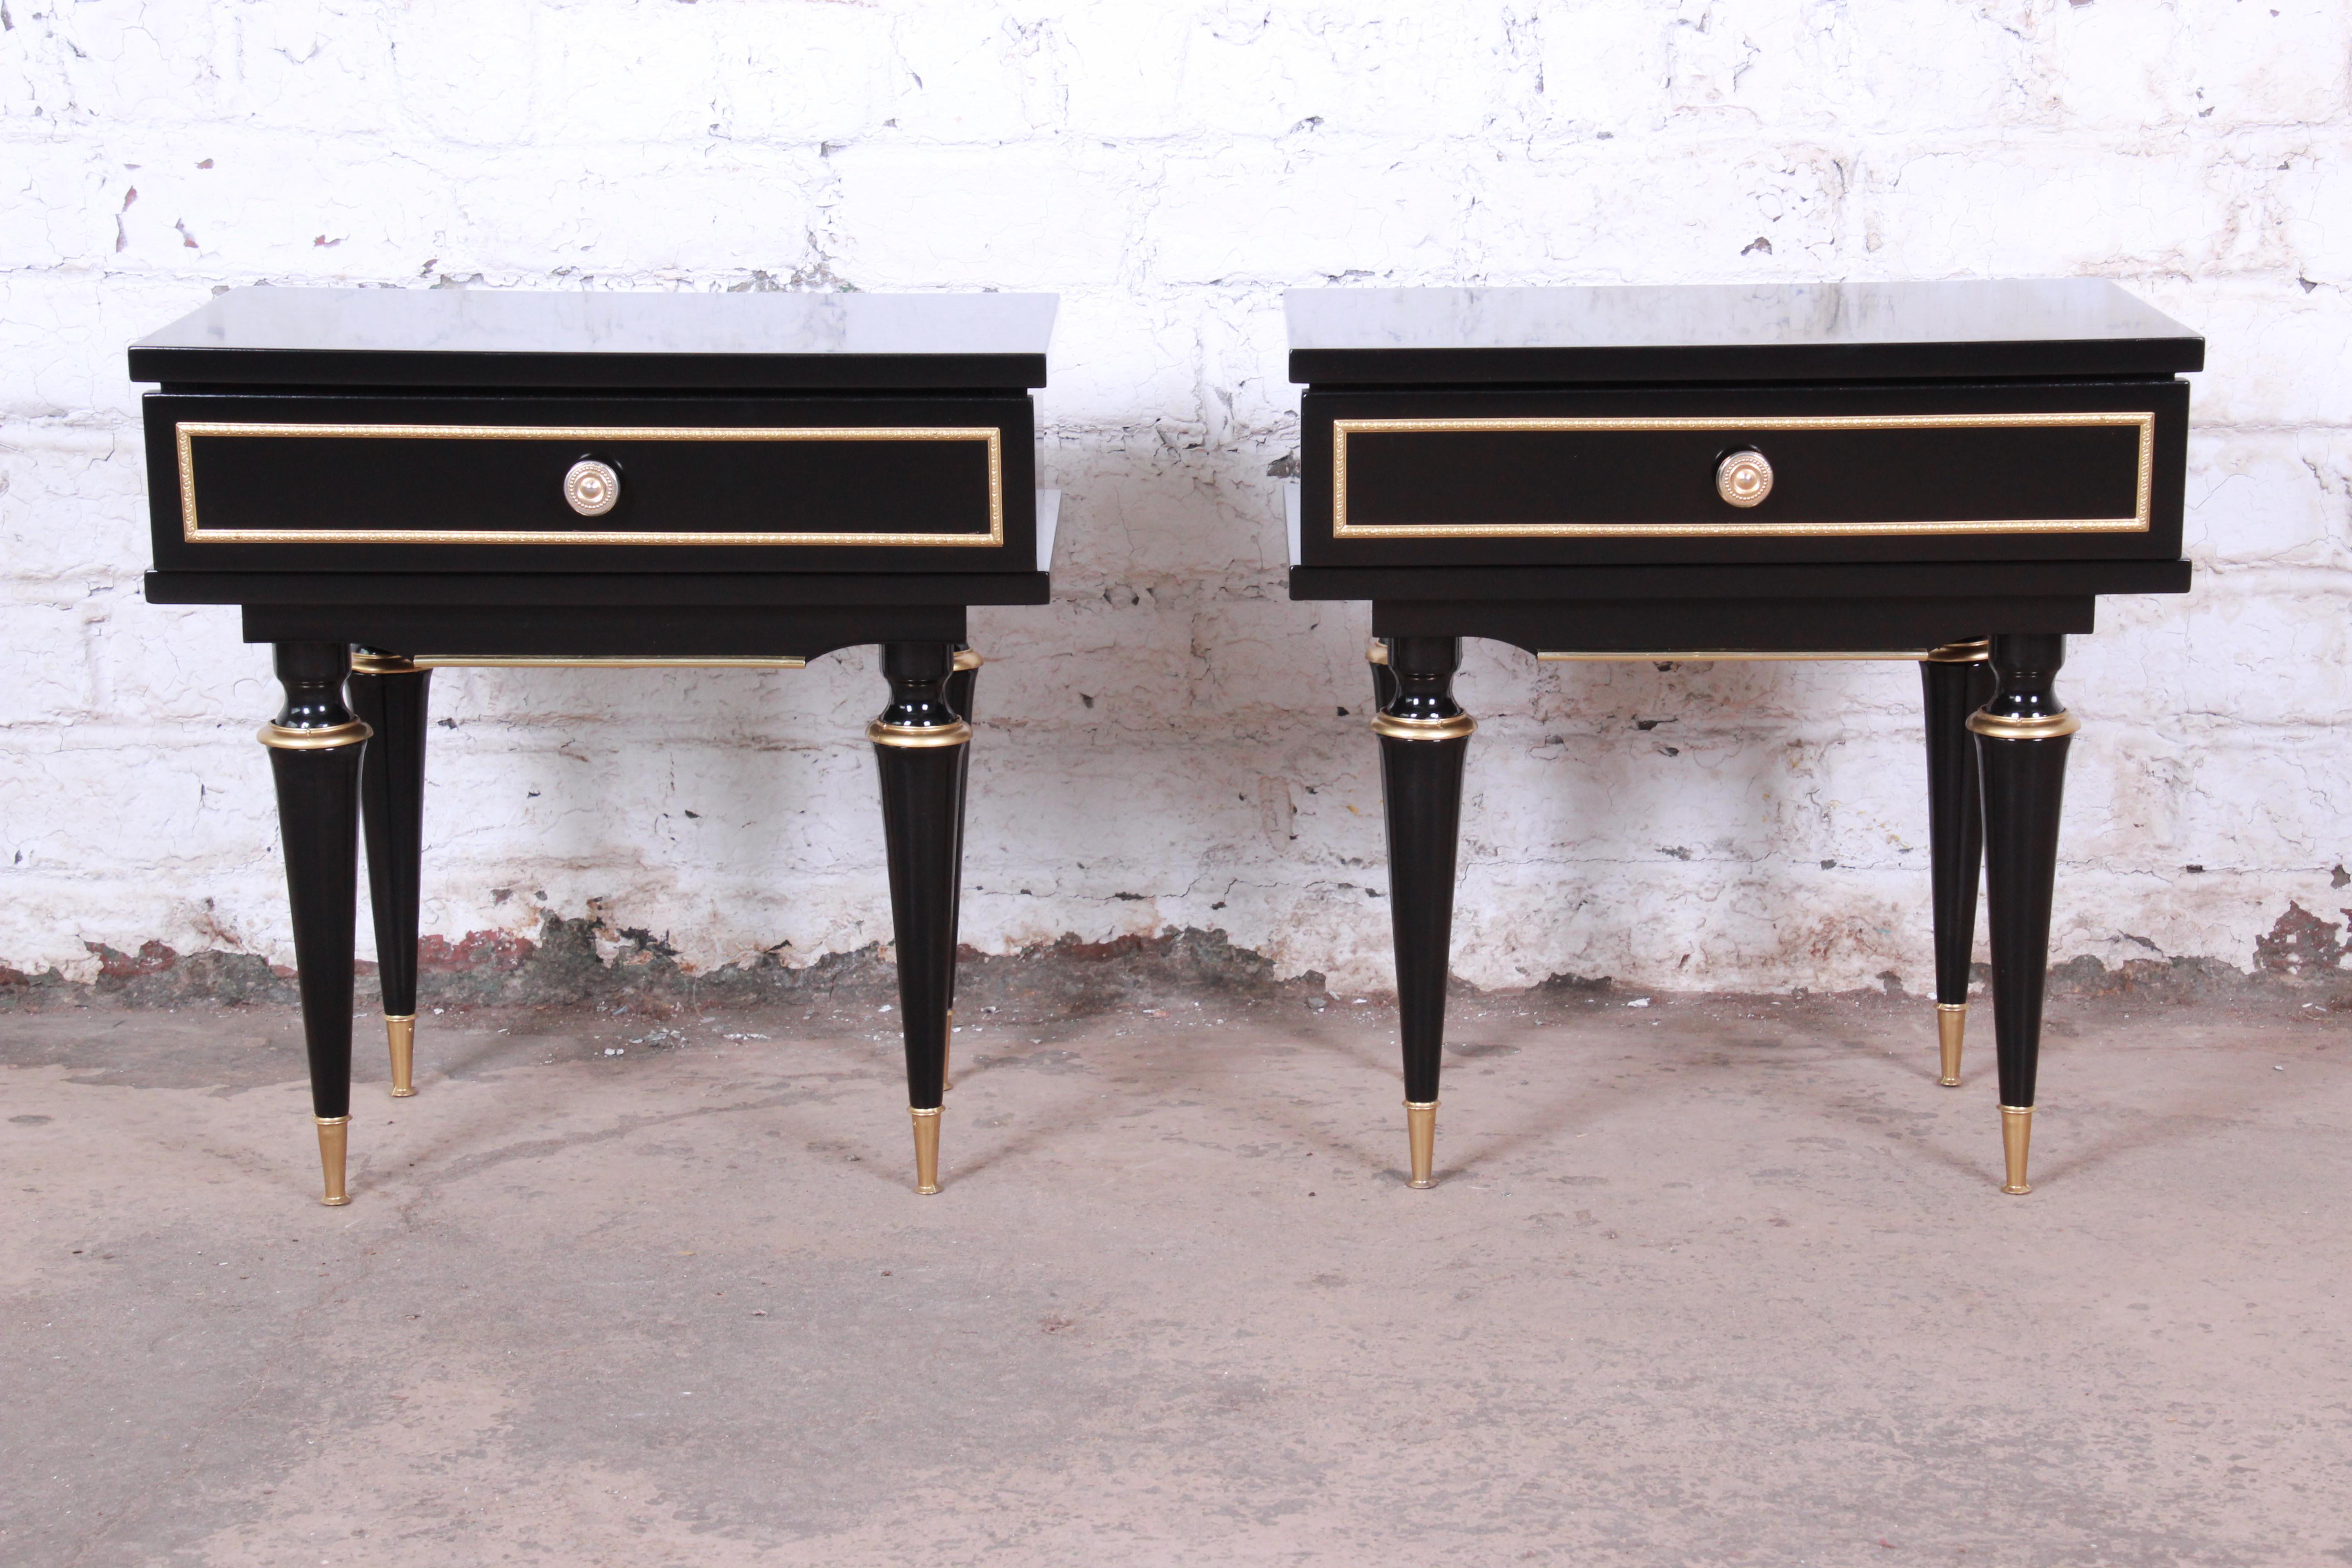 An outstanding pair of French Mid-Century Modern nightstands or end tables. The nightstands feature a high gloss ebonized finish with gorgeous brass-tipped feet, trim, and accents. They each have a single dovetailed drawer. The nightstands are